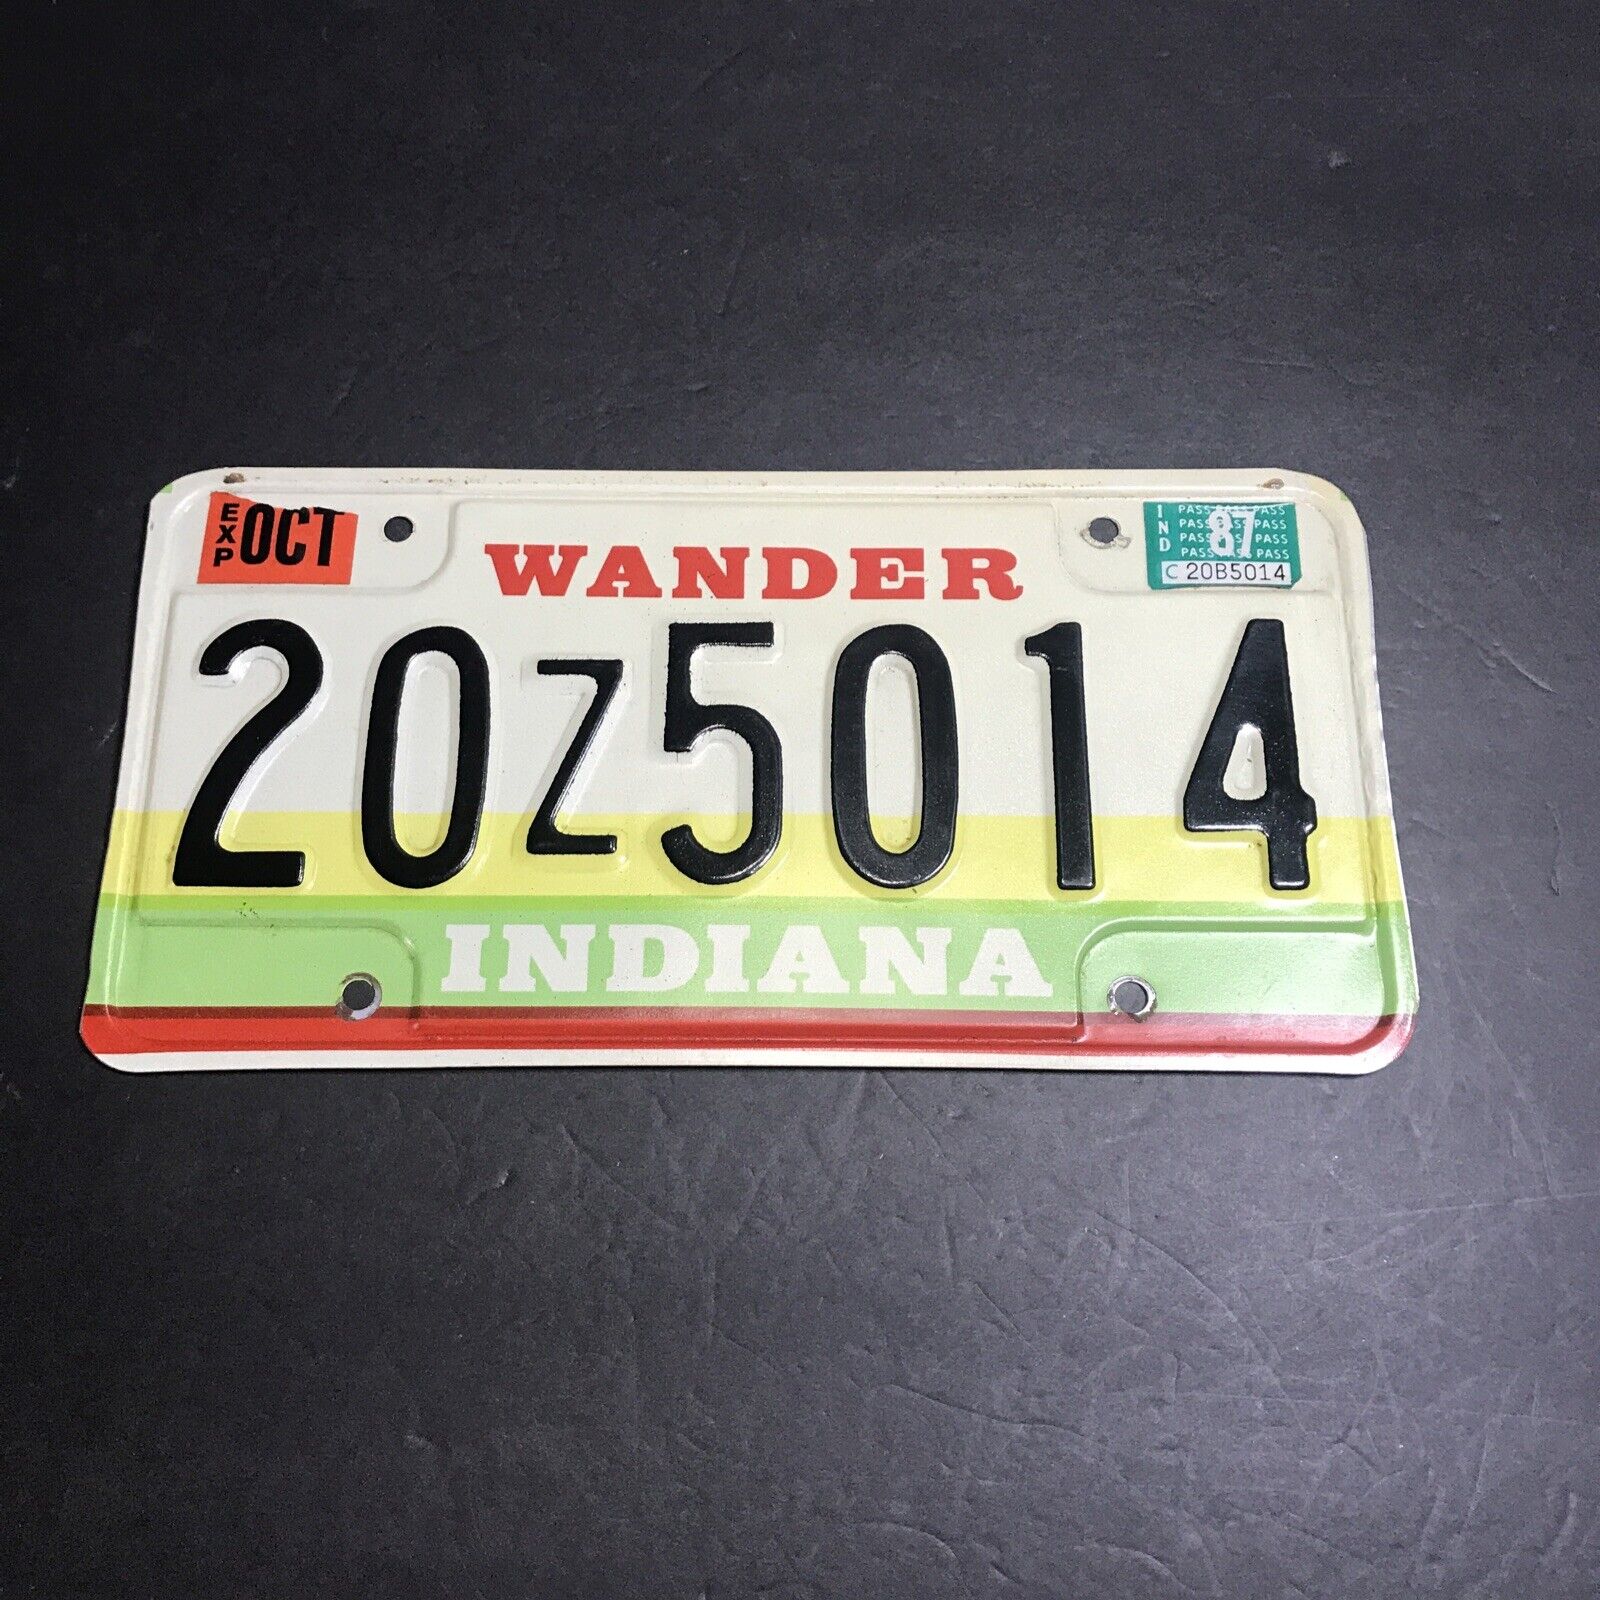 Indiana License Plate 1987 Elkhart County “Wander” 20Z5014